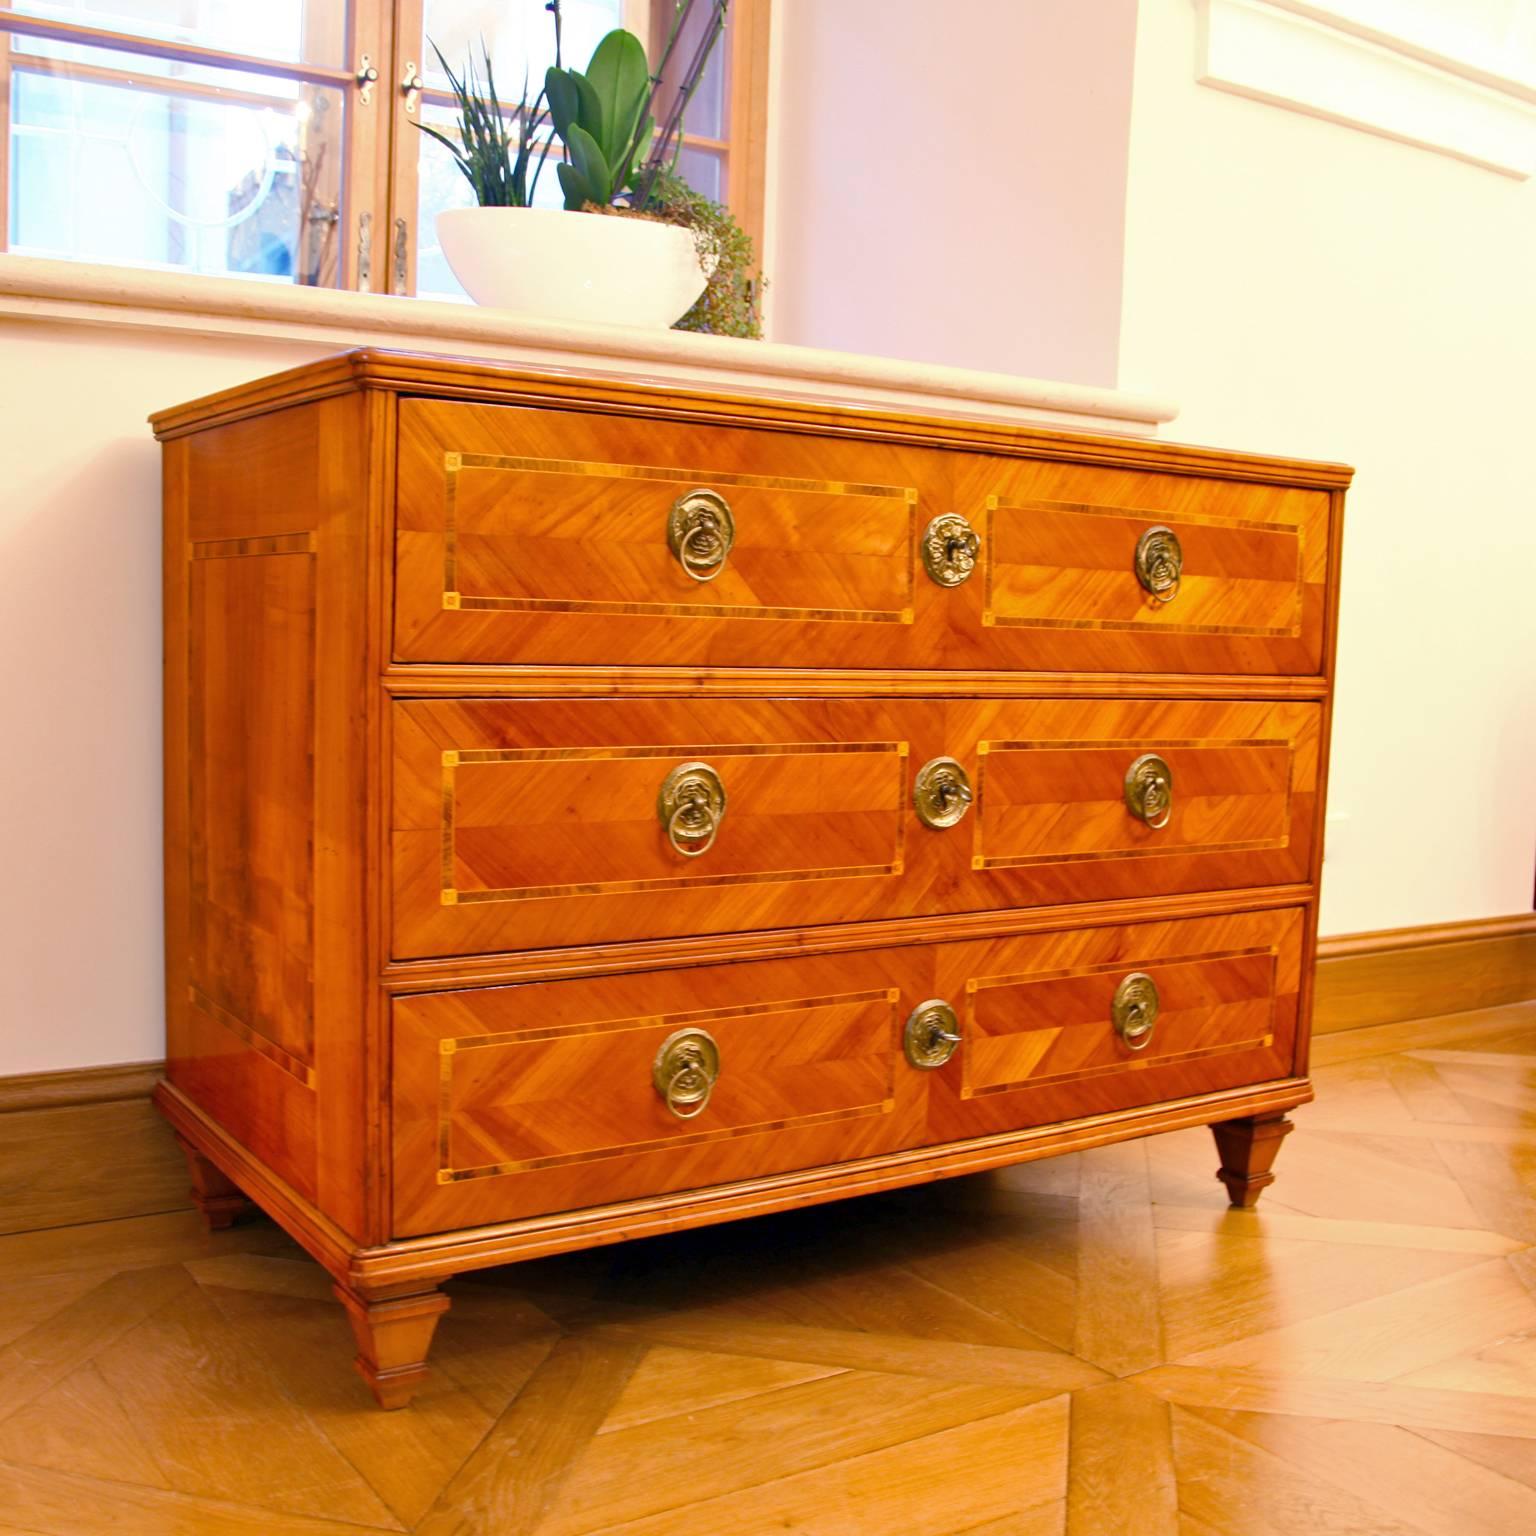 Three-drawered Louis Seize chest of drawers on profiled tapered feet. The chest shows a very beautiful cheerywood veneer pattern with framing inlays on the top, sides and on the front.